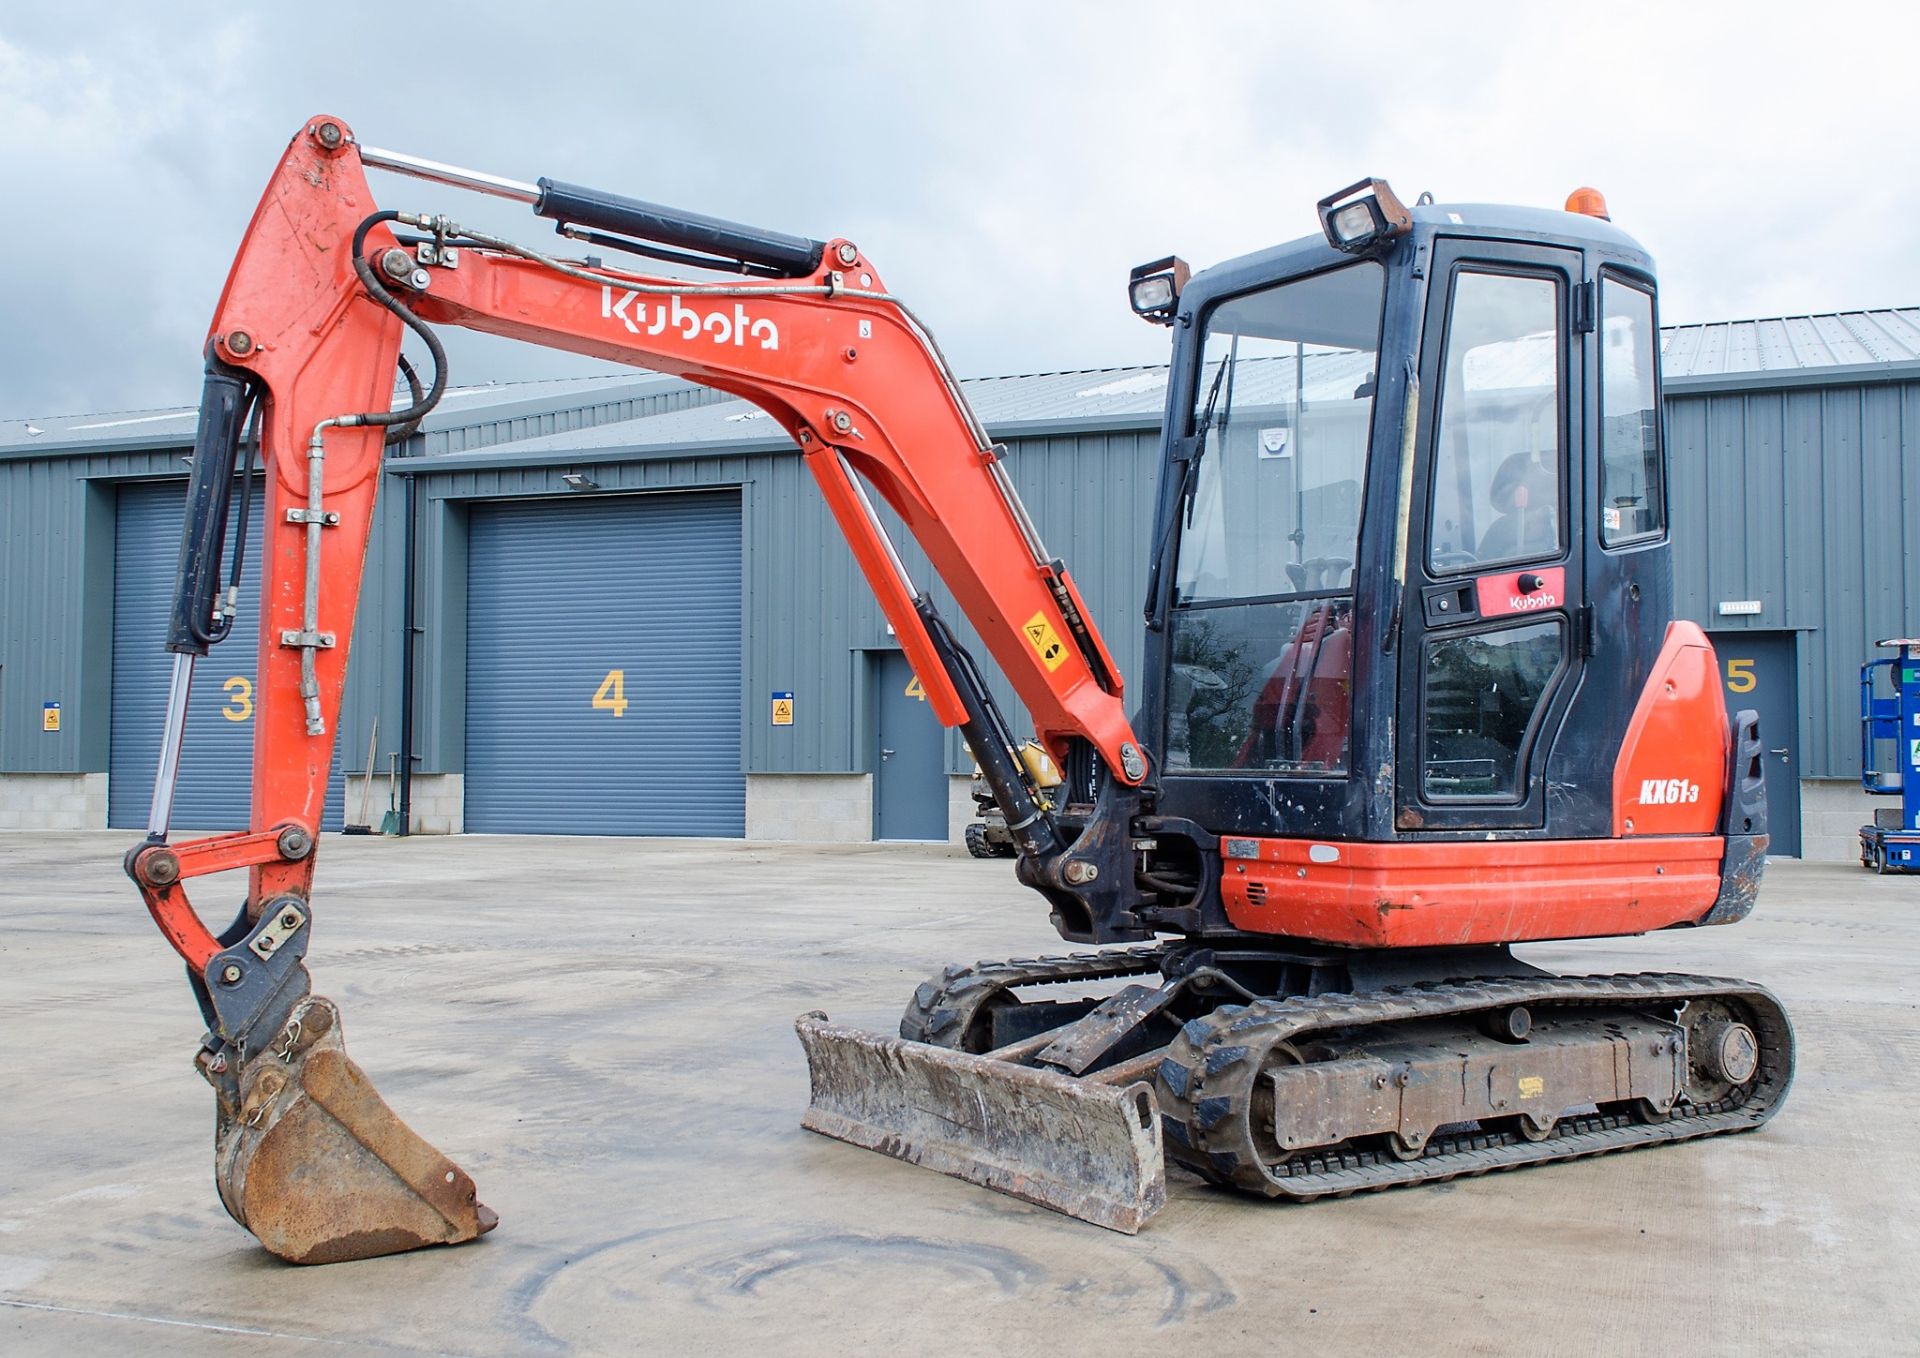 Kubota KX61-3 2.6 tonne rubber tracked excavator Year: 2015 S/N: 82259 Recorded Hours: 2075 blade,